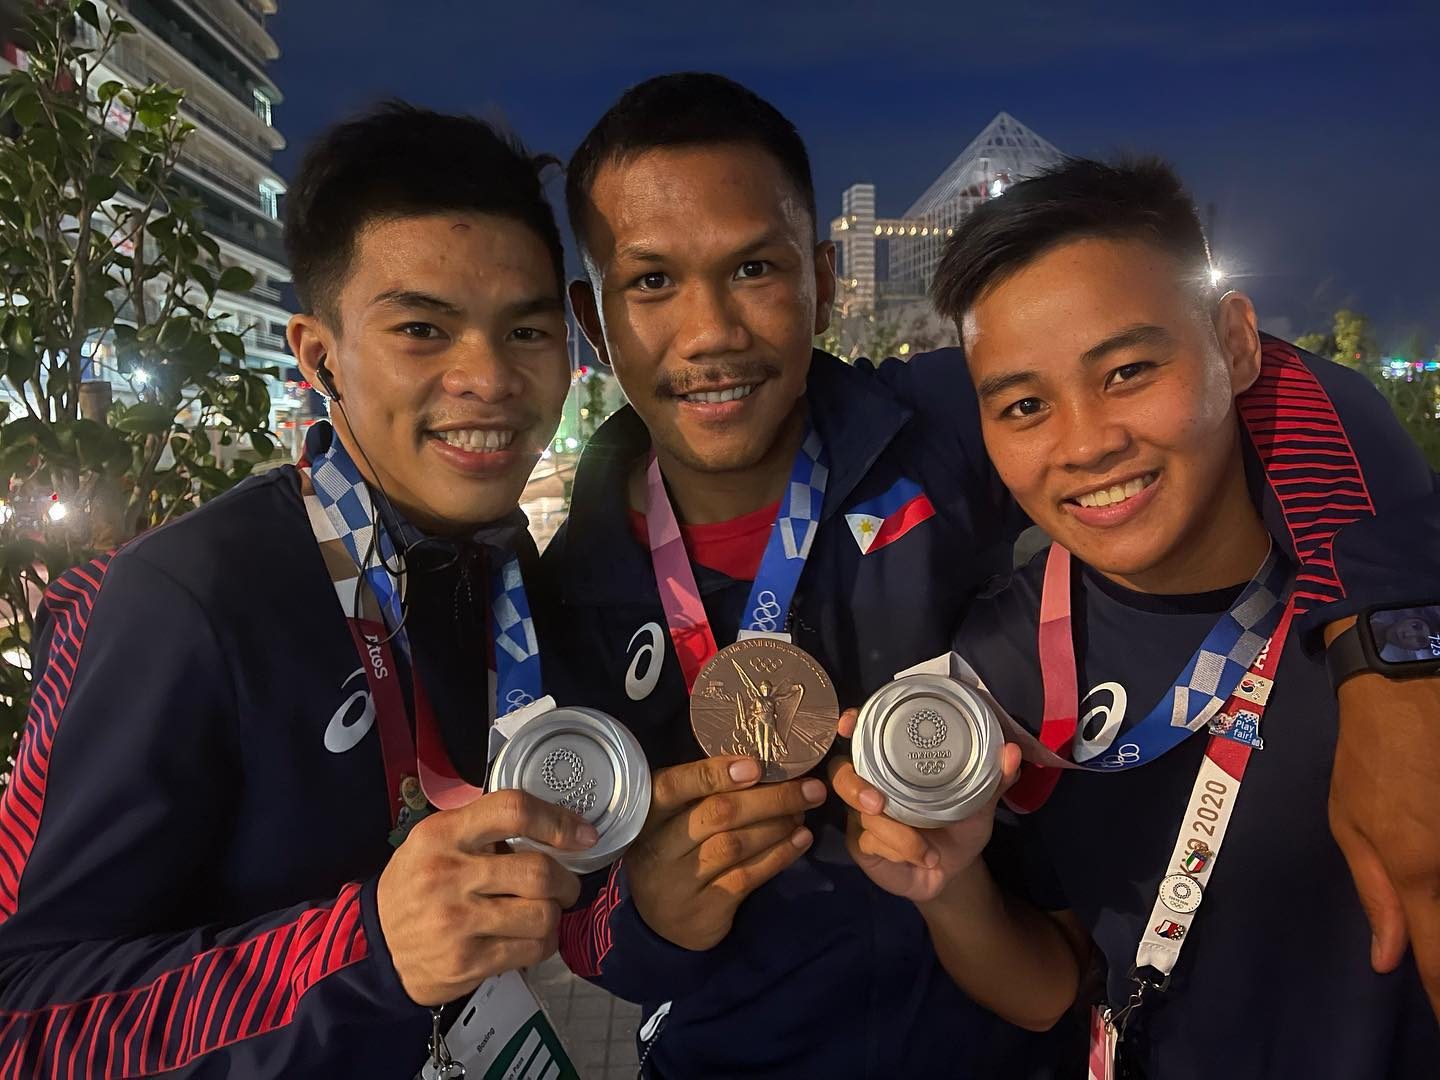 Millionaire’s row: Olympic boxing medalists receive cash rewards